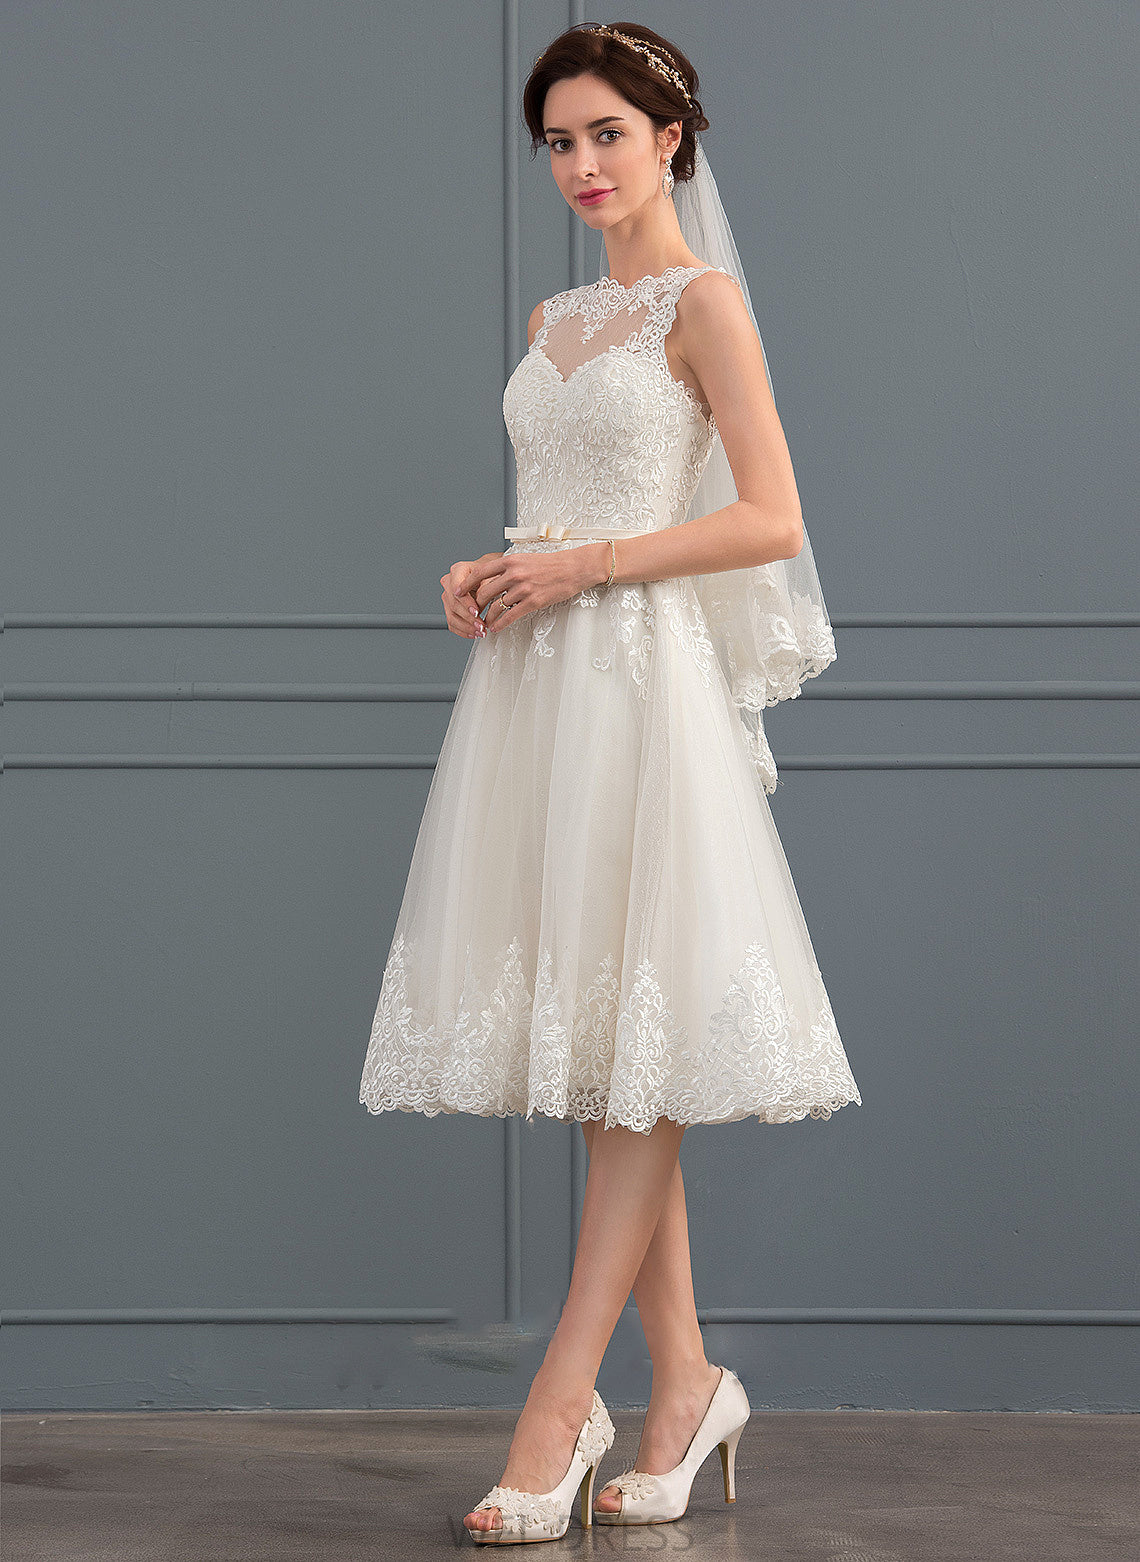 Bow(s) Megan Knee-Length With Illusion A-Line Tulle Wedding Wedding Dresses Dress